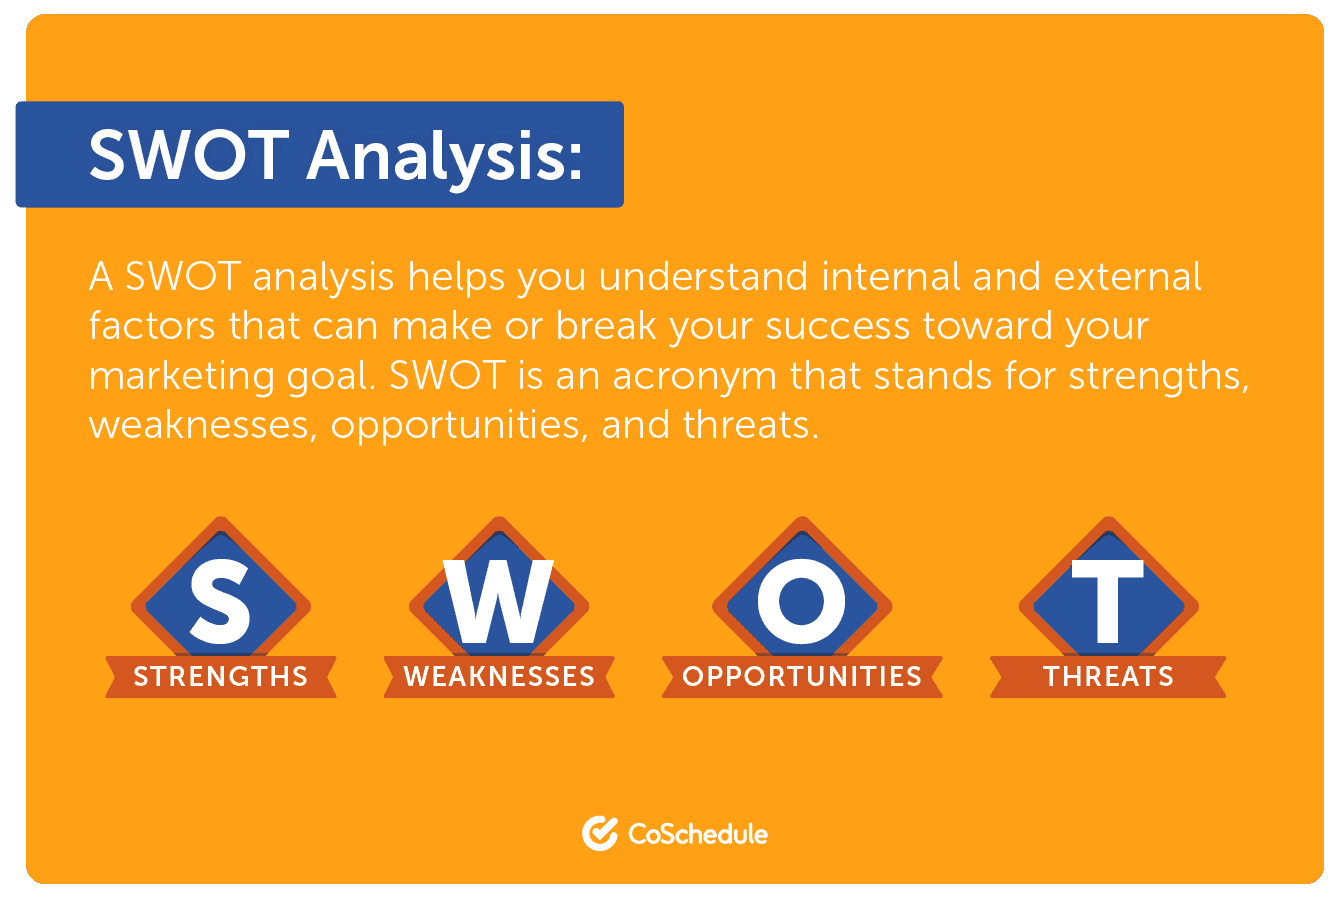 Image of the SWOT Analysis model